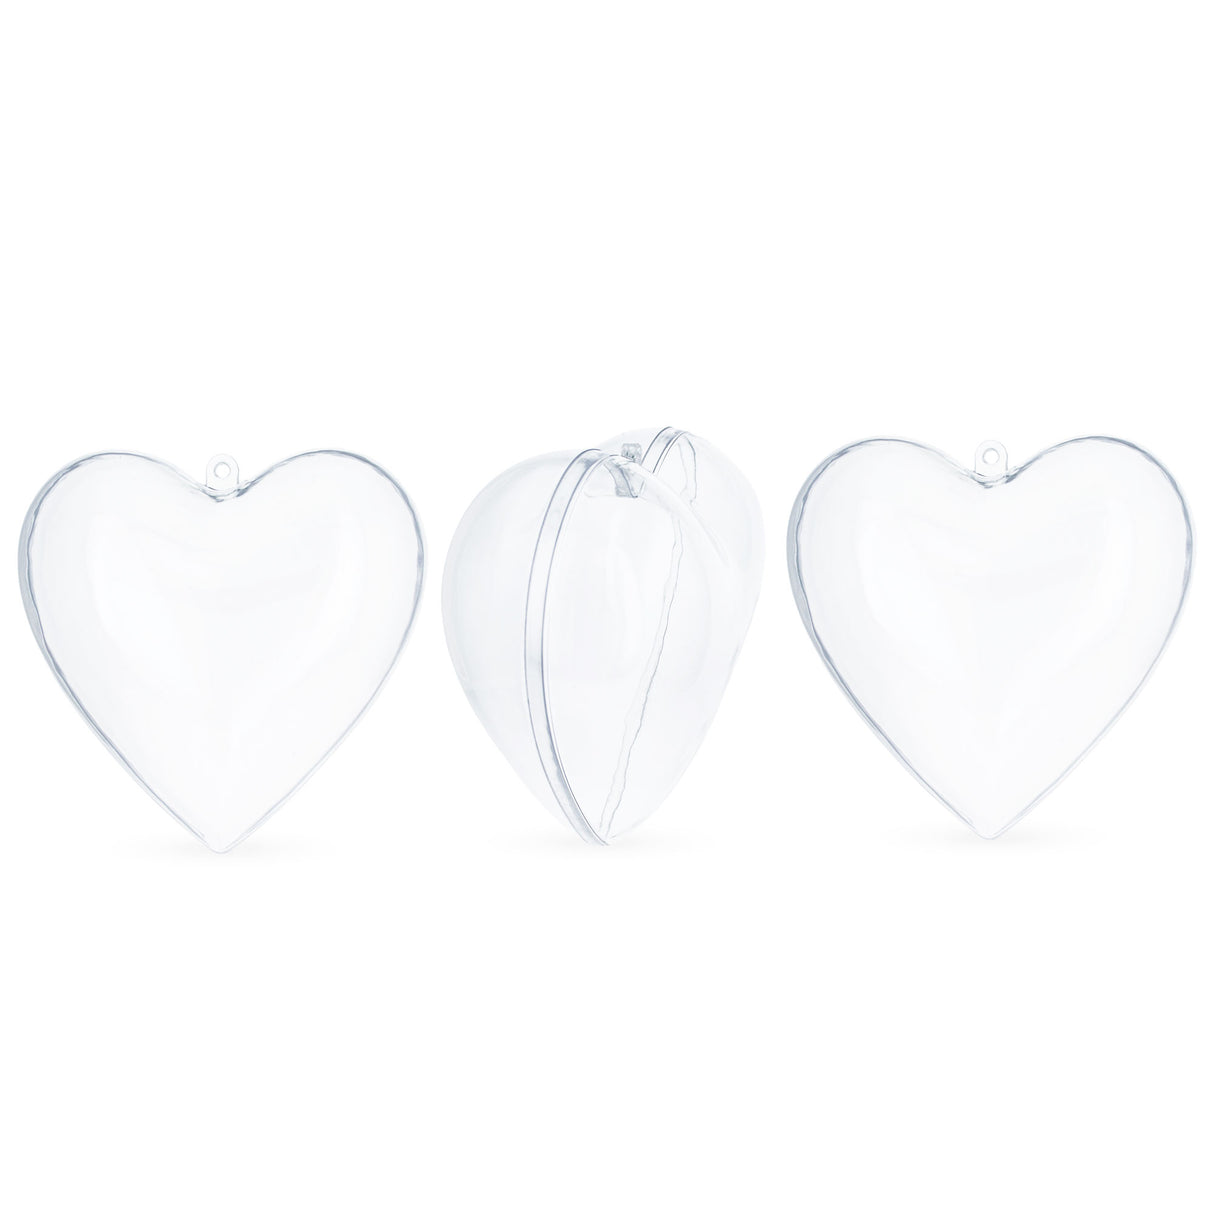 Set of 3 Clear Plastic Heart Ornaments 3.85 Inches (98 mm) in Clear color, Heart shape